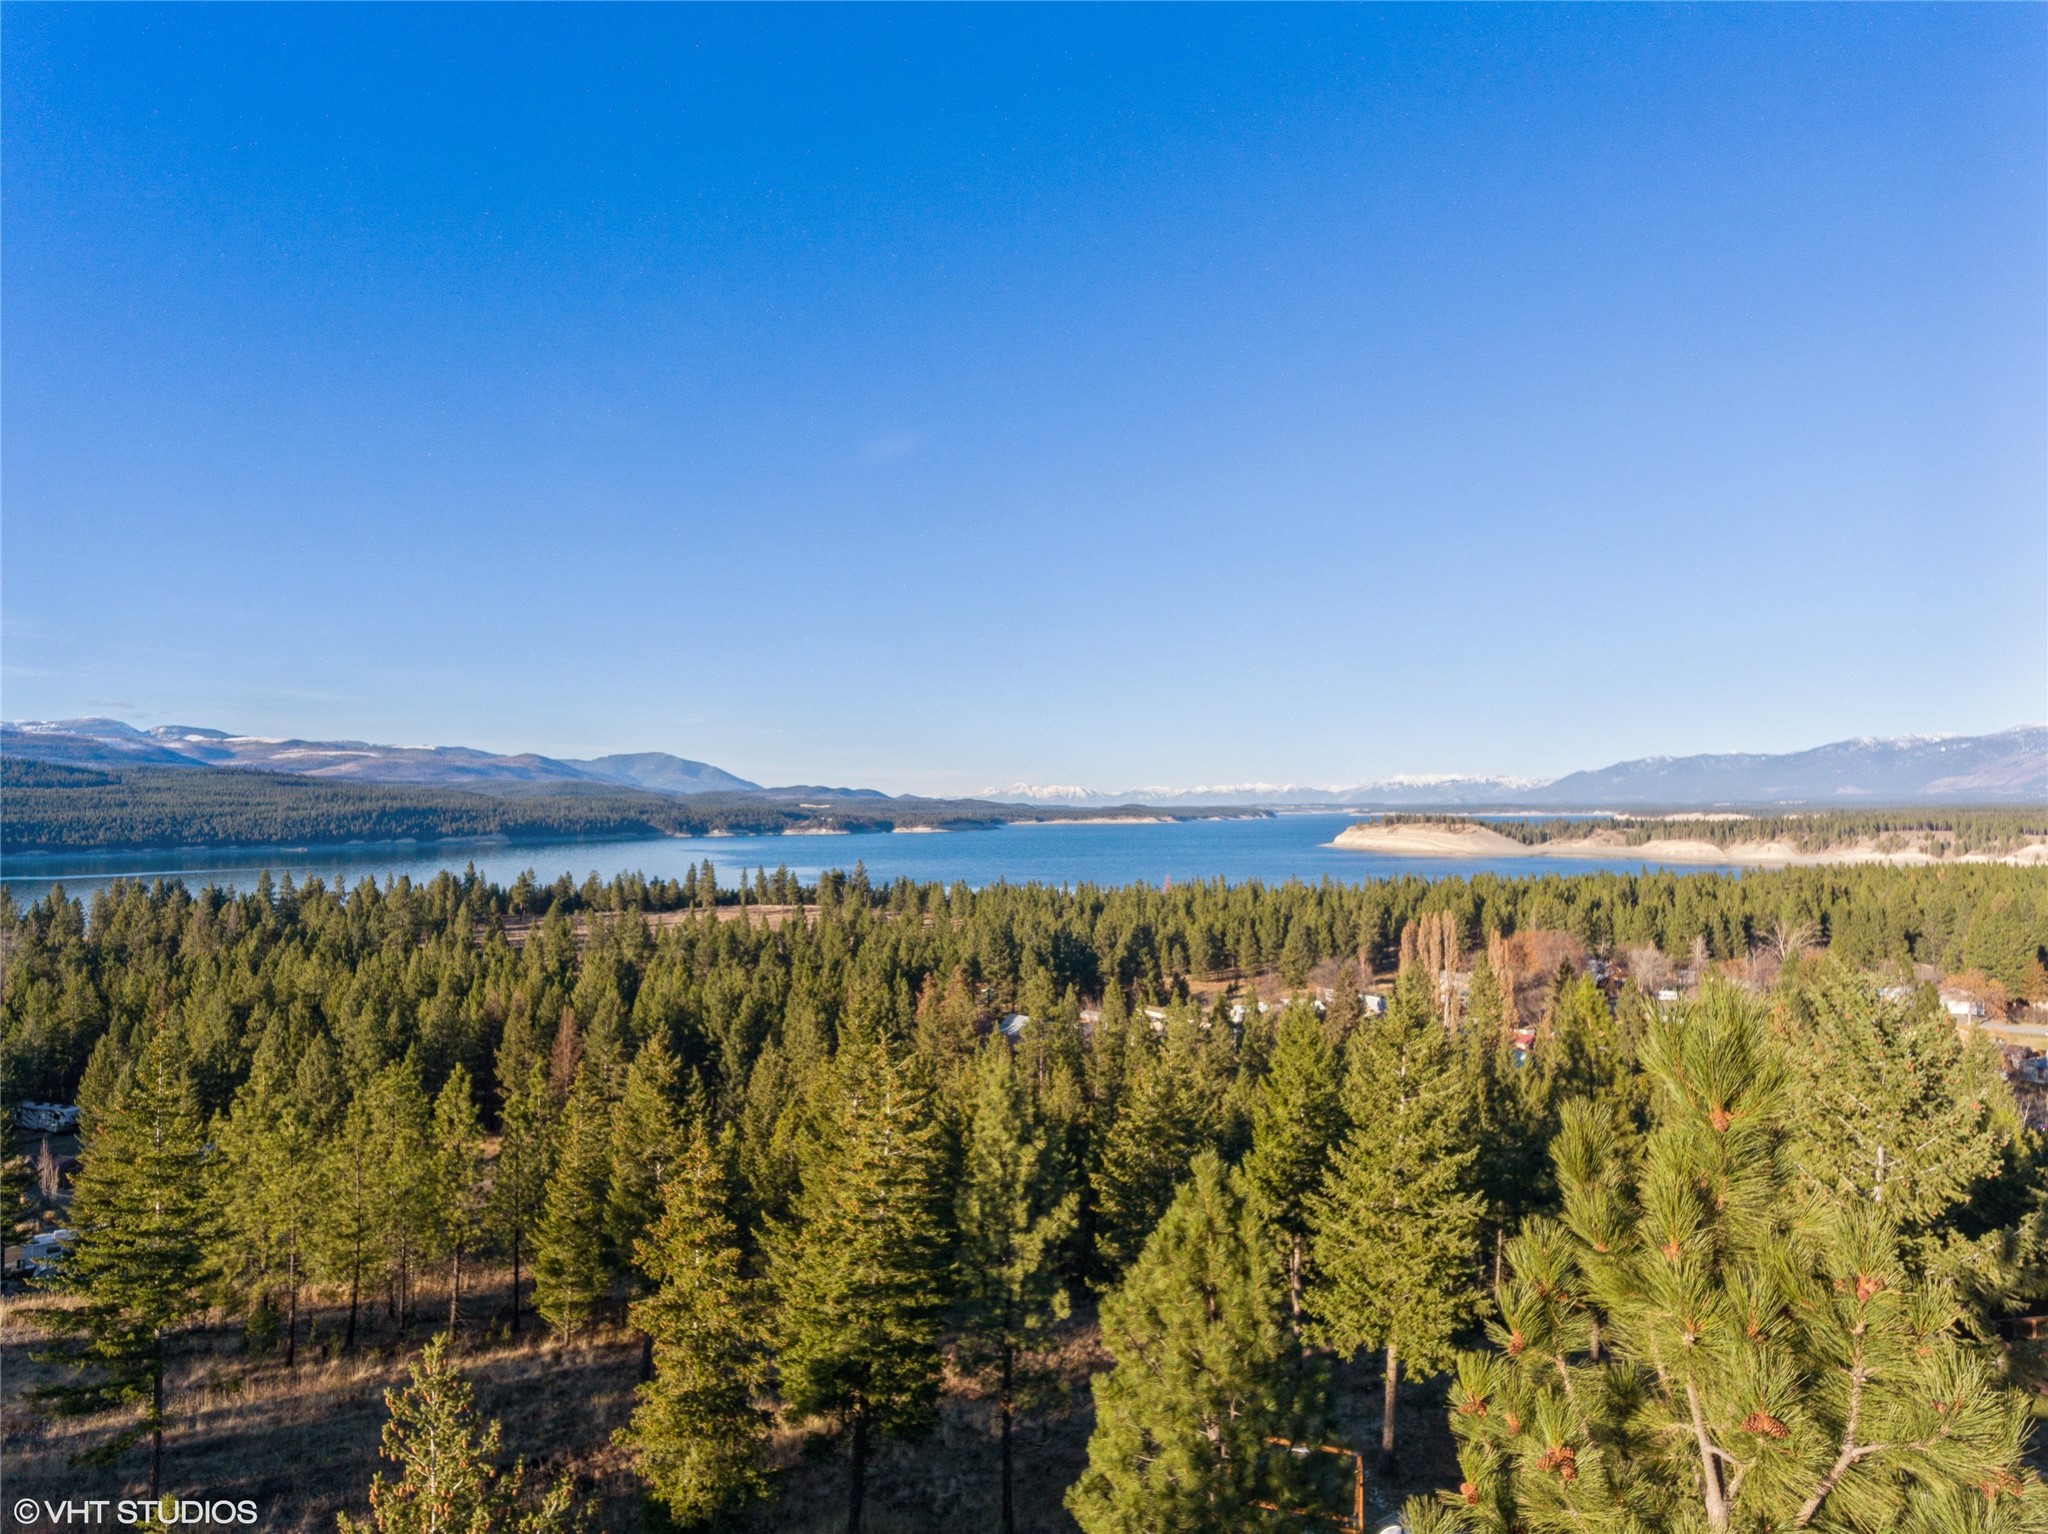 Elk View Estates Lot 3, 3.13 acres is like the VIP section for views, offering jaw-dropping panoramas of Lake Koocanusa, the Tobacco Valley, and even a peek at Canada! Just a stone's throw away from Abayance Bay, you can zip over in your side-by-side in a matter of minutes! With private and public boat launches nearby, you're set for aquatic adventures. The lake has a paved trail to accommodate a bike ride with lake and mountain views at any time! The property is located just a little over an hour from three snow/ski resorts and is minutes from thousands of acres of public land. Glacier International Airport and Glacier Park are a little over an hour away and Canada is less than 10 minutes. All of this is set in one of the lowest elevations in Montana which makes for Montana recreational living at its finest. For more info call Terry Comstock at 406-250-7722 , Colter Comstock 307-431-9787 or your Real Estate Professional. Amidst the timberlands of northwestern Montana, north of Libby along the Kootenai River, Rexford, Montana lies 7 miles from the Canadian border. The Purcell Mountains and Salish Mountains surround Rexford making it a recreation lovers paradise. Enjoy camping, hiking, hunting, snowmobiling, boating, and rock climbing (at nearby Stone Hill). It’s also a great location to begin the Lake Koocanusa Scenic Byway, a 67-mile route around the lake that connects Libby and Eureka. Nearby is the Ten Lake Scenic Area of the Kootenai National Forest which encompasses 15,700 acres. The area offers more than 89 miles of trails for remote backpacking and exploring. The high alpine lakes offer fishing and hiking opportunities through rugged mountain terrain of elevations of more than 7,800 feet.
 
Eureka, Montana centralizes along a two-mile stretch of Highway 93 in the lush Tobacco Valley. The scenic area is surrounded by the Kootenai National Forest and the backside of Glacier National Park. All year round there are activities and ways to enjoy the great outdoors. The small town is minutes from the Canadian border and also features the number one golf course in the state, the Wilderness Club. Eureka is 1 hour from three snow ski hills, 1 hour from Glacier and Waterton National Parks, and 1 hour from Glacier International Airport. Lake Koocanusa has gorgeous white-sand beaches and offers incredible fishing and boating!